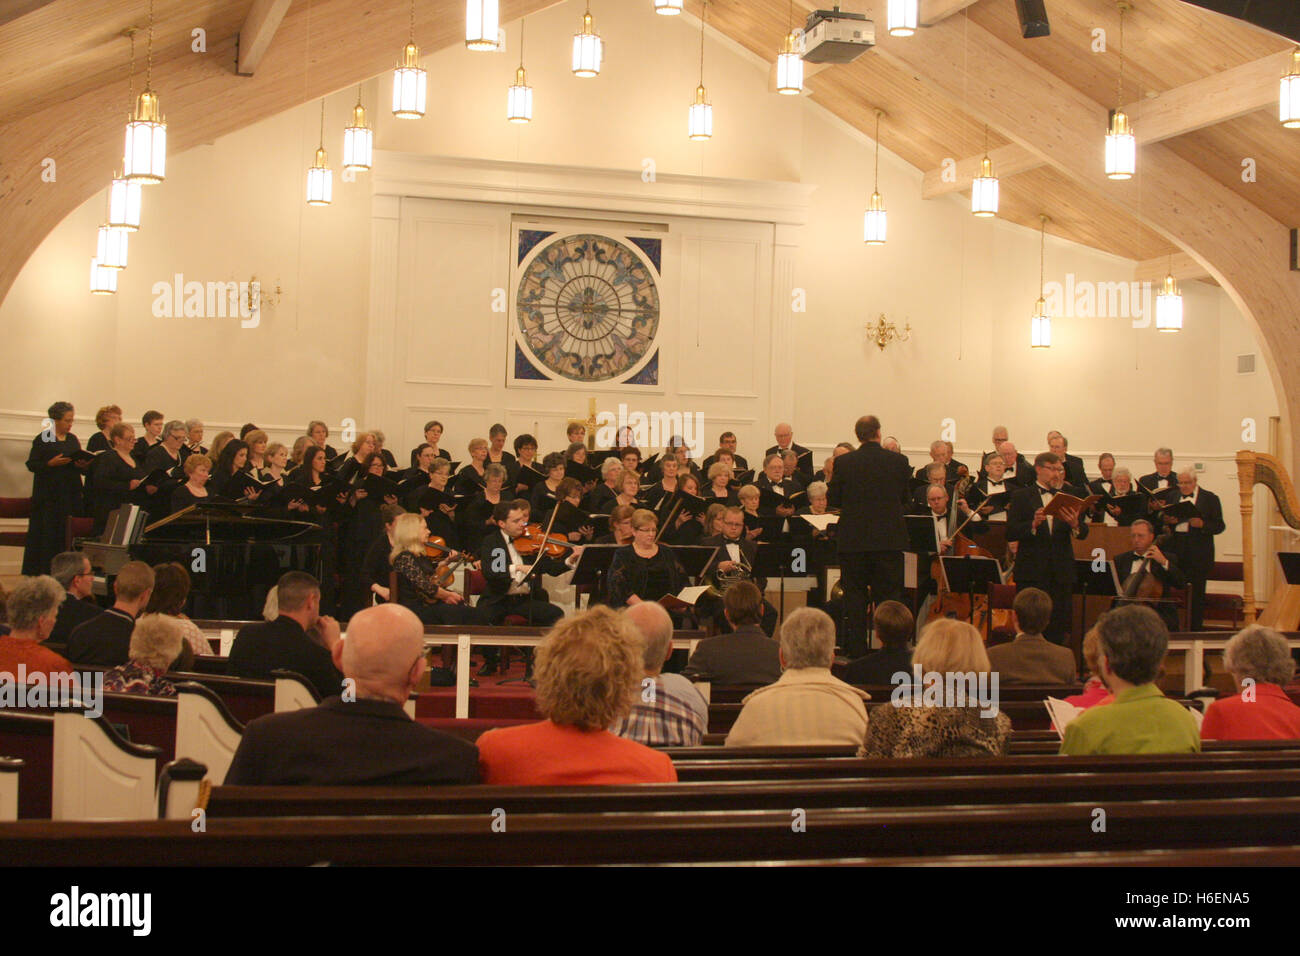 Choir and orchestra having a public performance in church Stock Photo